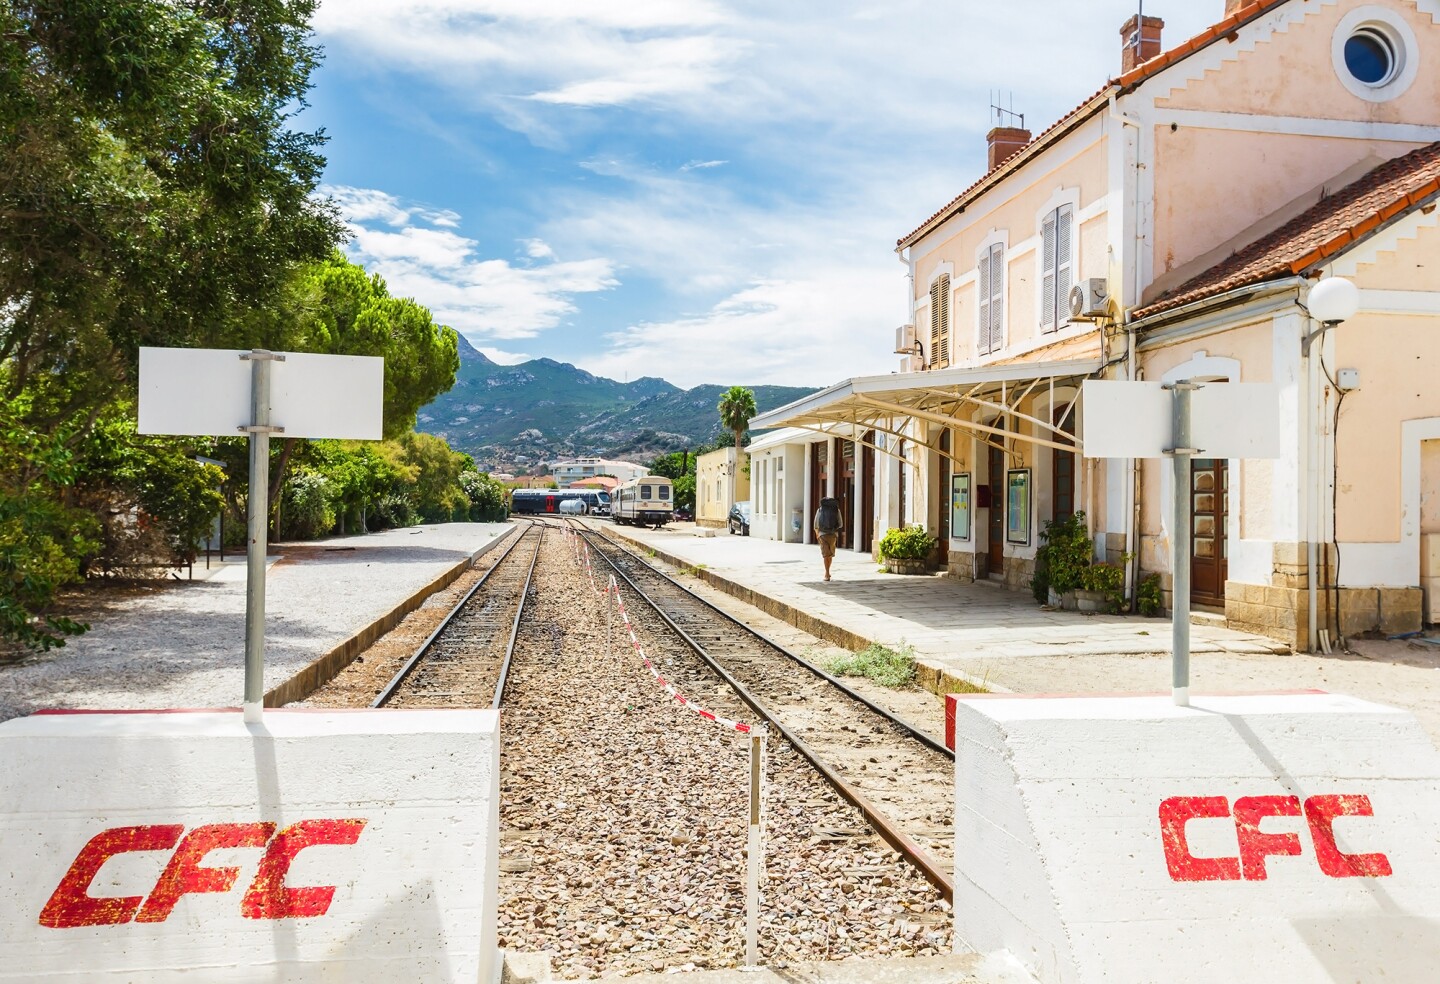 <h2>2. U Trinichellu, Corsica, France</h2> <p>This little old-fashioned train shuttles you along the northwest coast of Corsica from L’Île-Rousse to Calvi, stopping in beach towns along the way. It’s a pick-and-choose train line: Most of the stops are on request. But don’t worry if you don’t like your choice—the tickets are hop on, hop off, so you can take a day to test all of the beaches on the Balagne coast, traveling with the sparkling Mediterranean on one side and craggy pine forests on the other.</p>